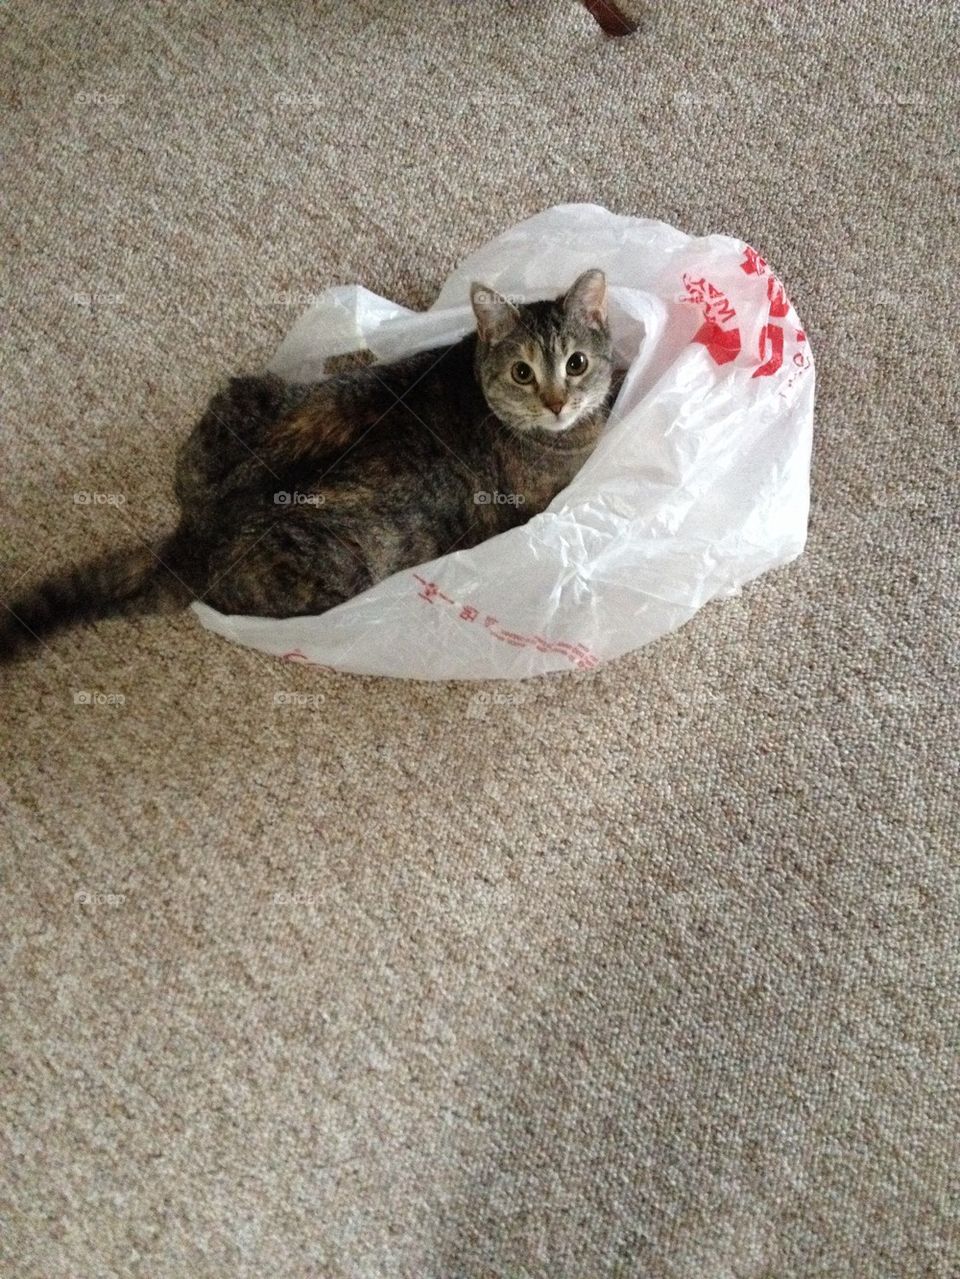 This Bag is (not) a Toy